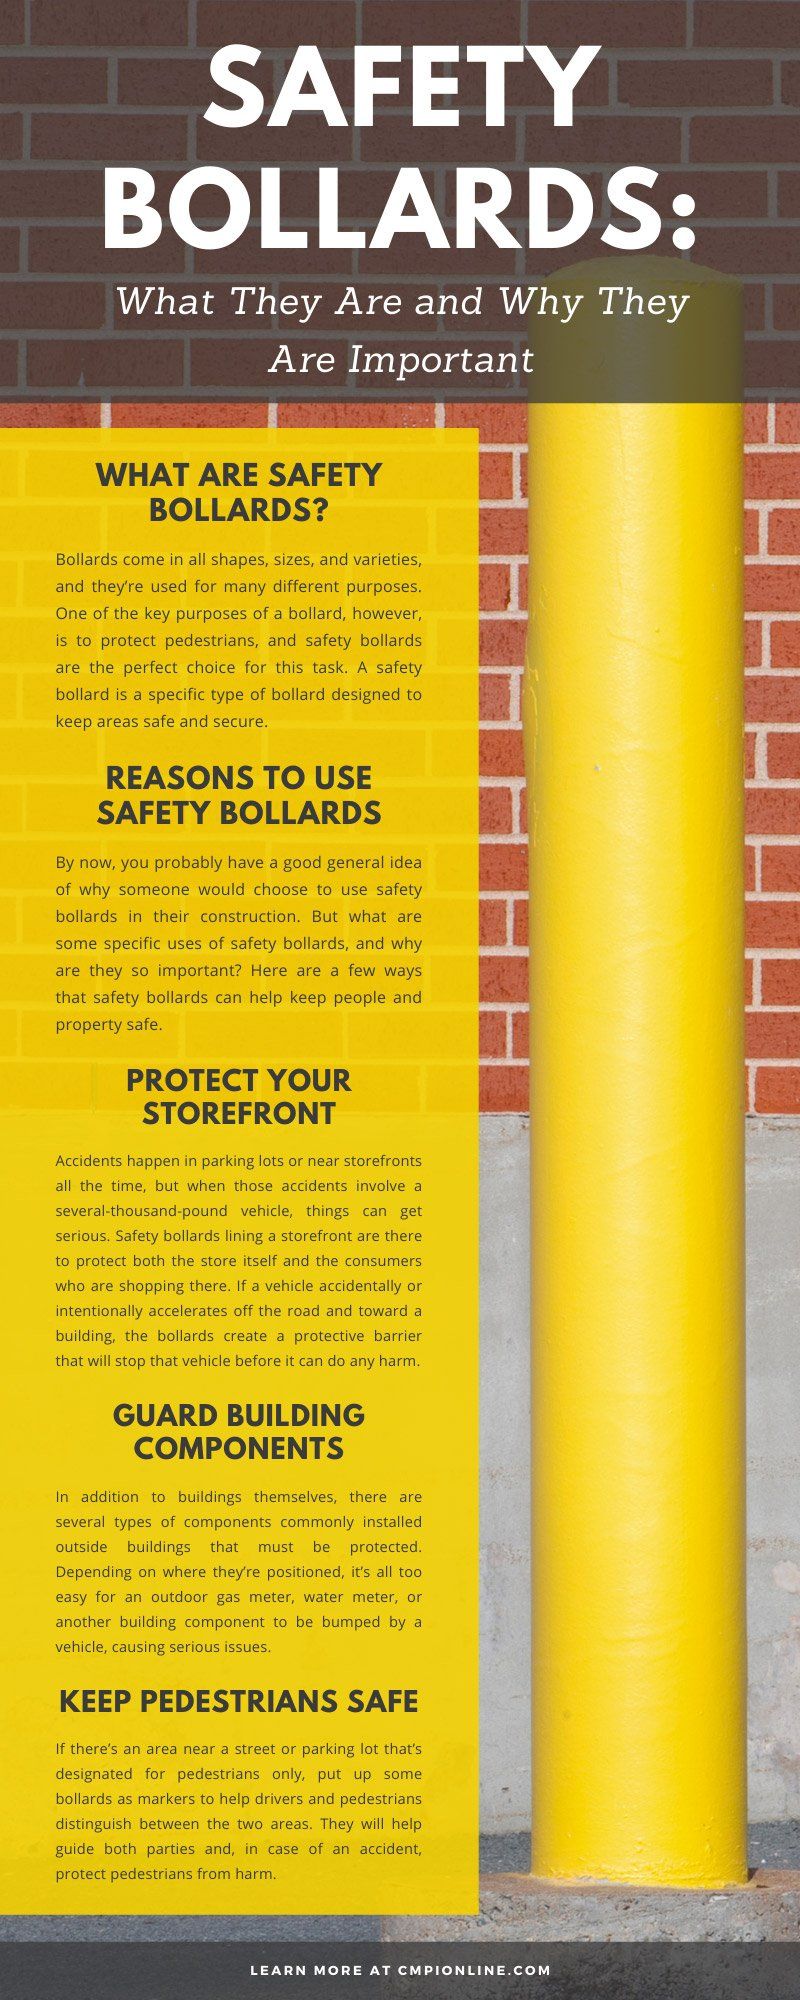 Safety Bollards: What They Are and Why They Are Important